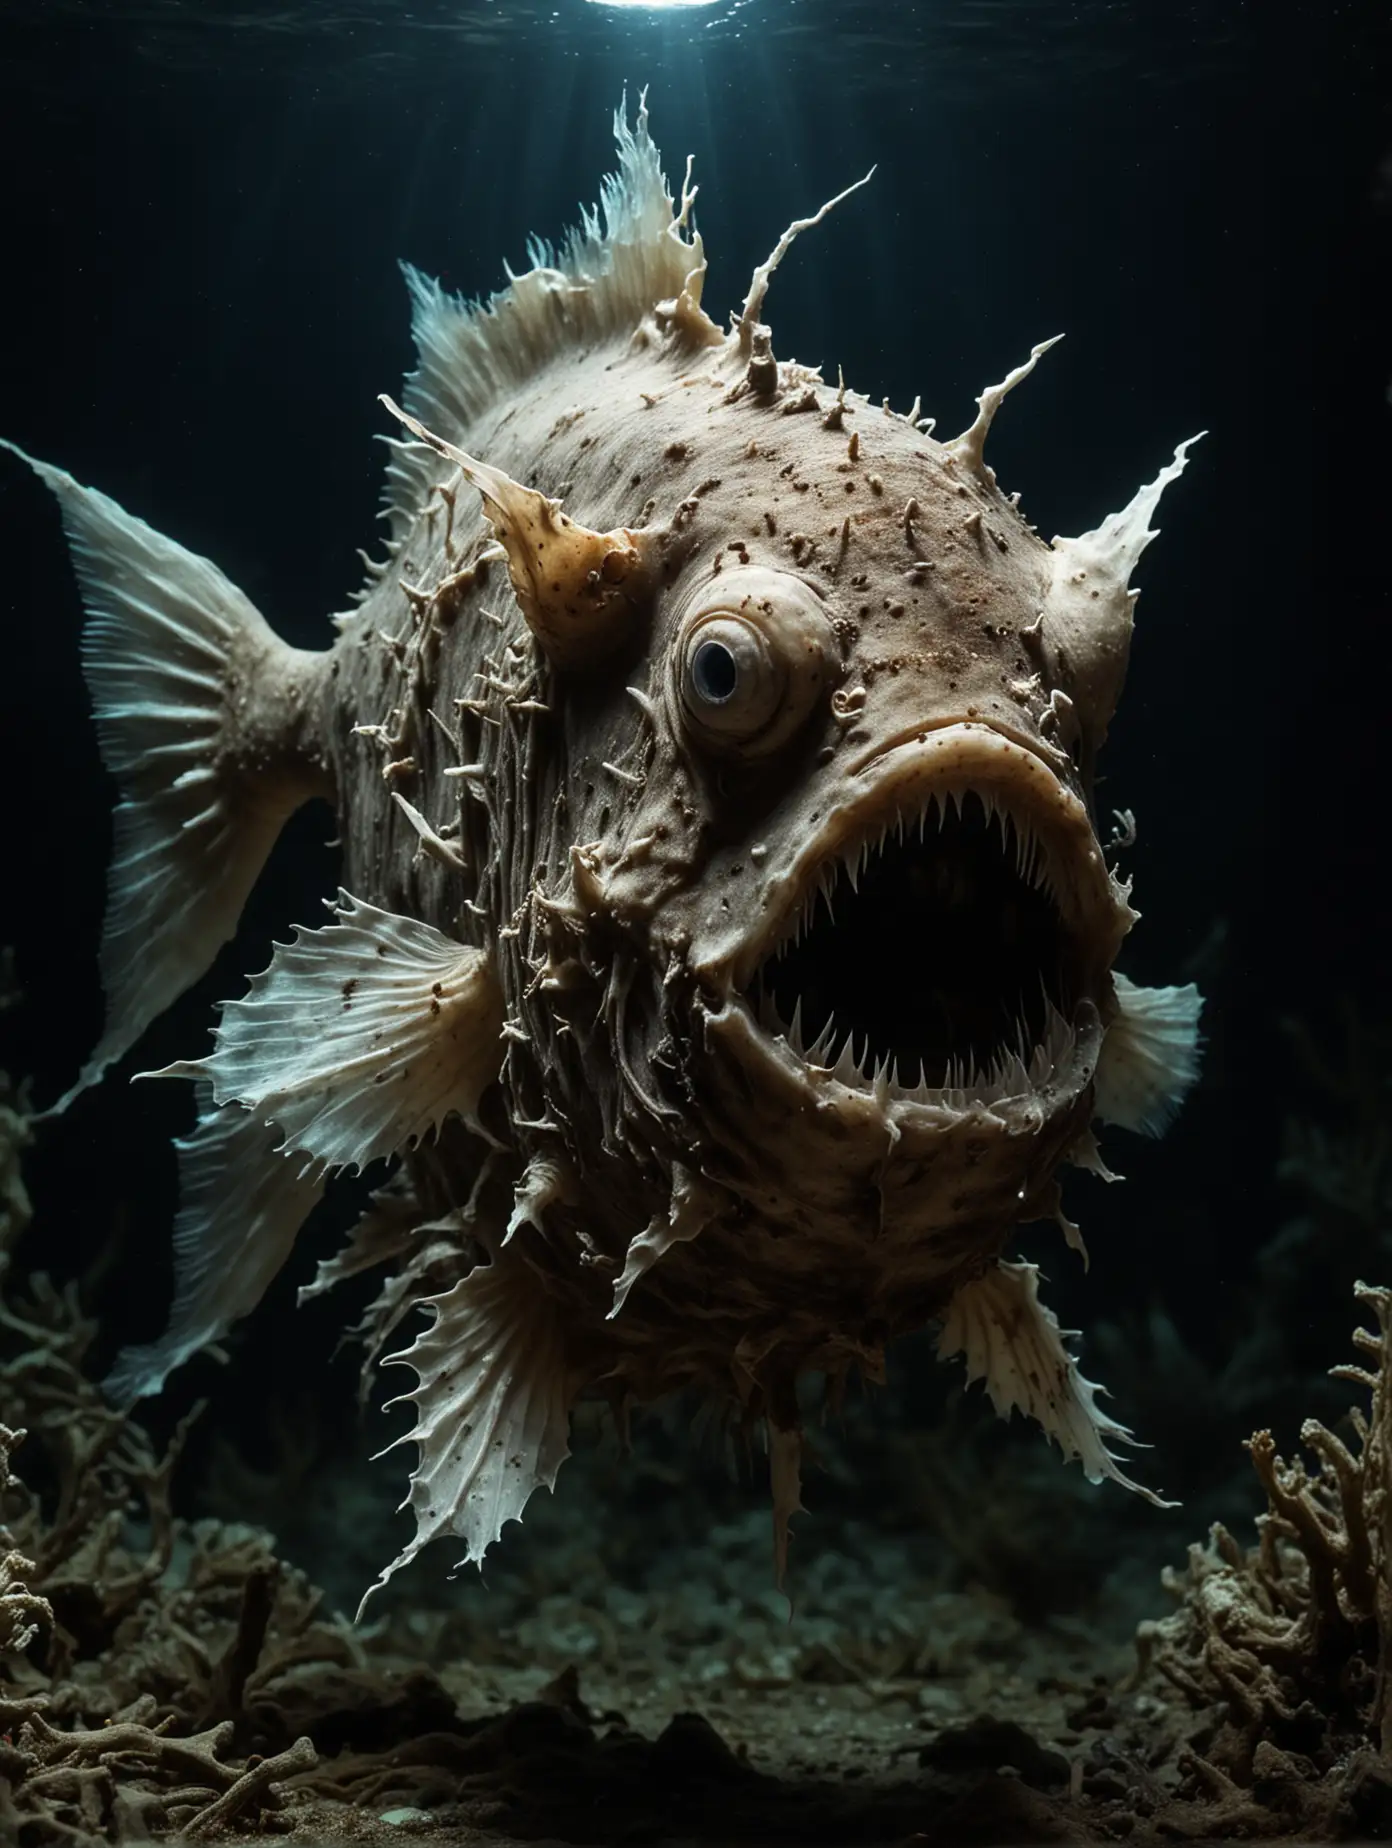 Creepy anglerfish, only light source illuminated from illicium, decaying look, some bones protruding